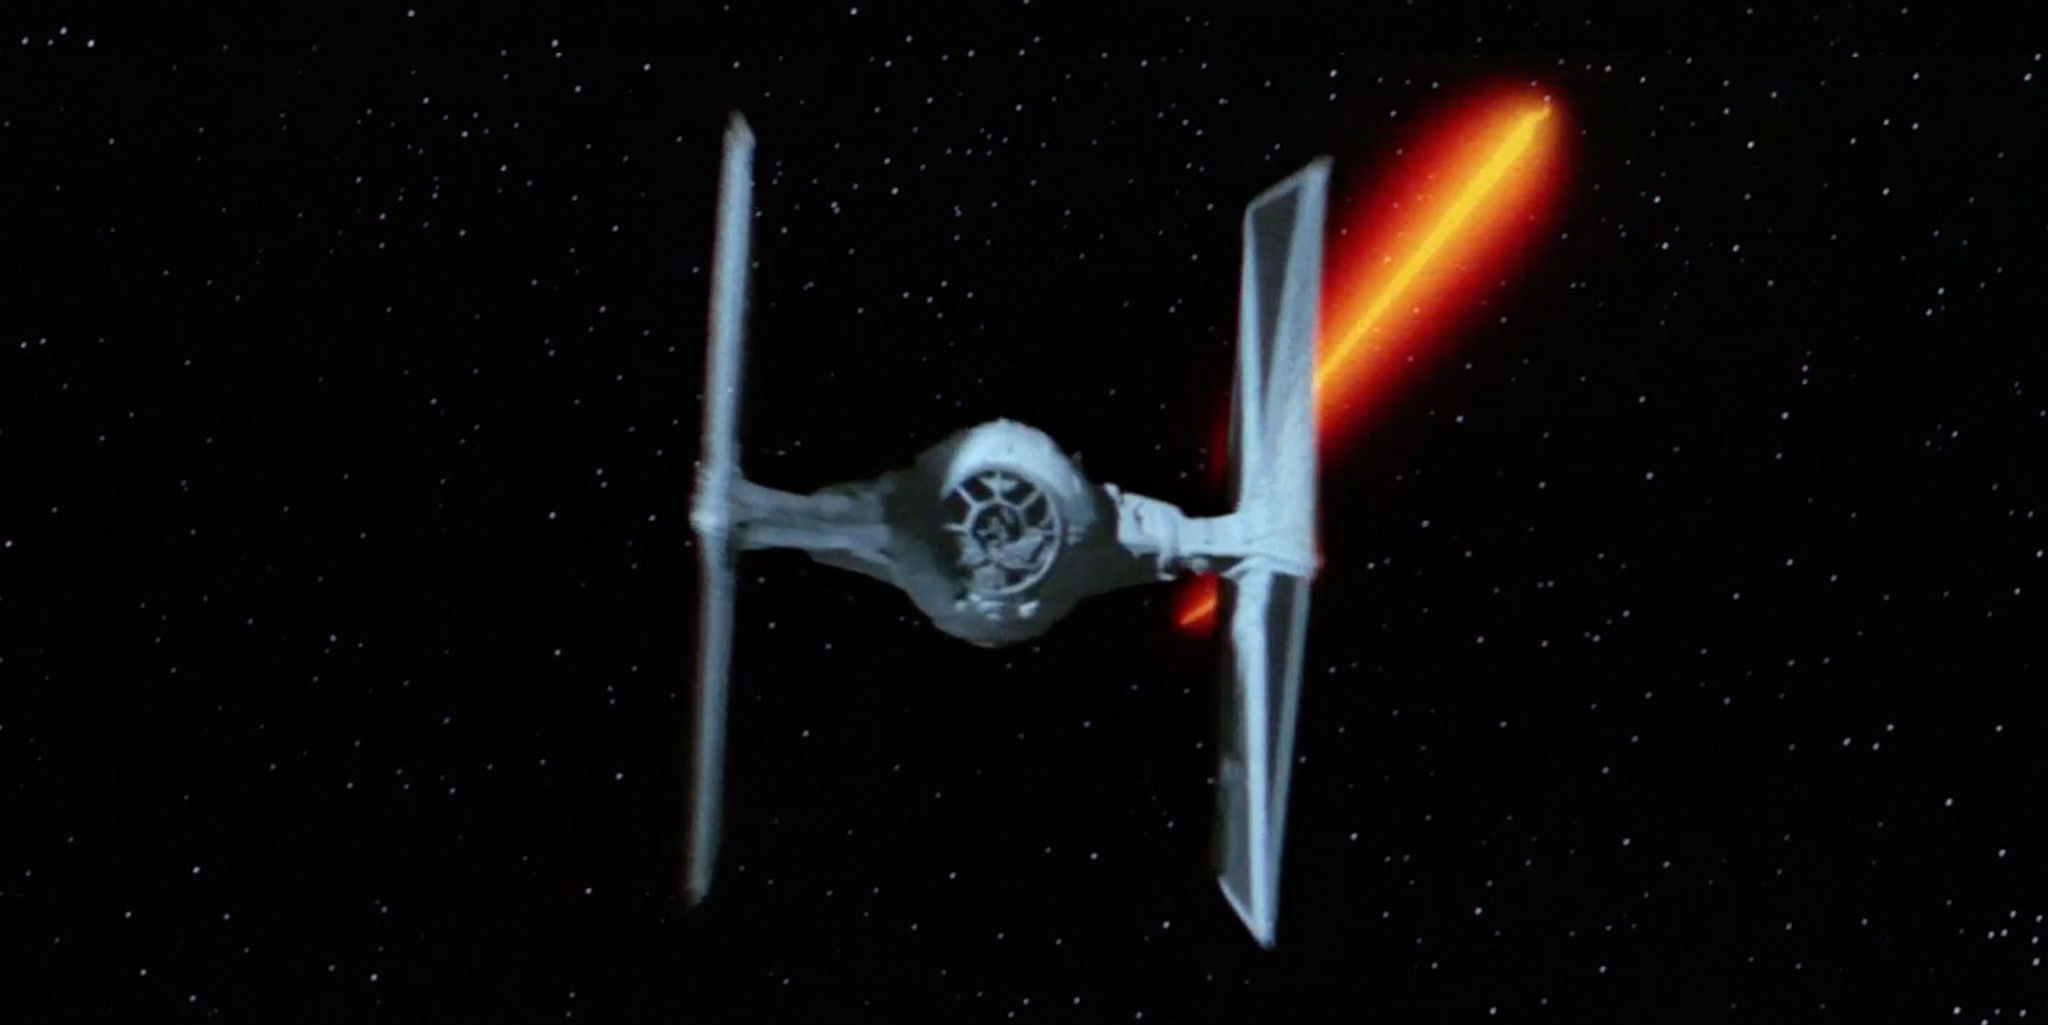 What does TIE stand for in Tie Fighter